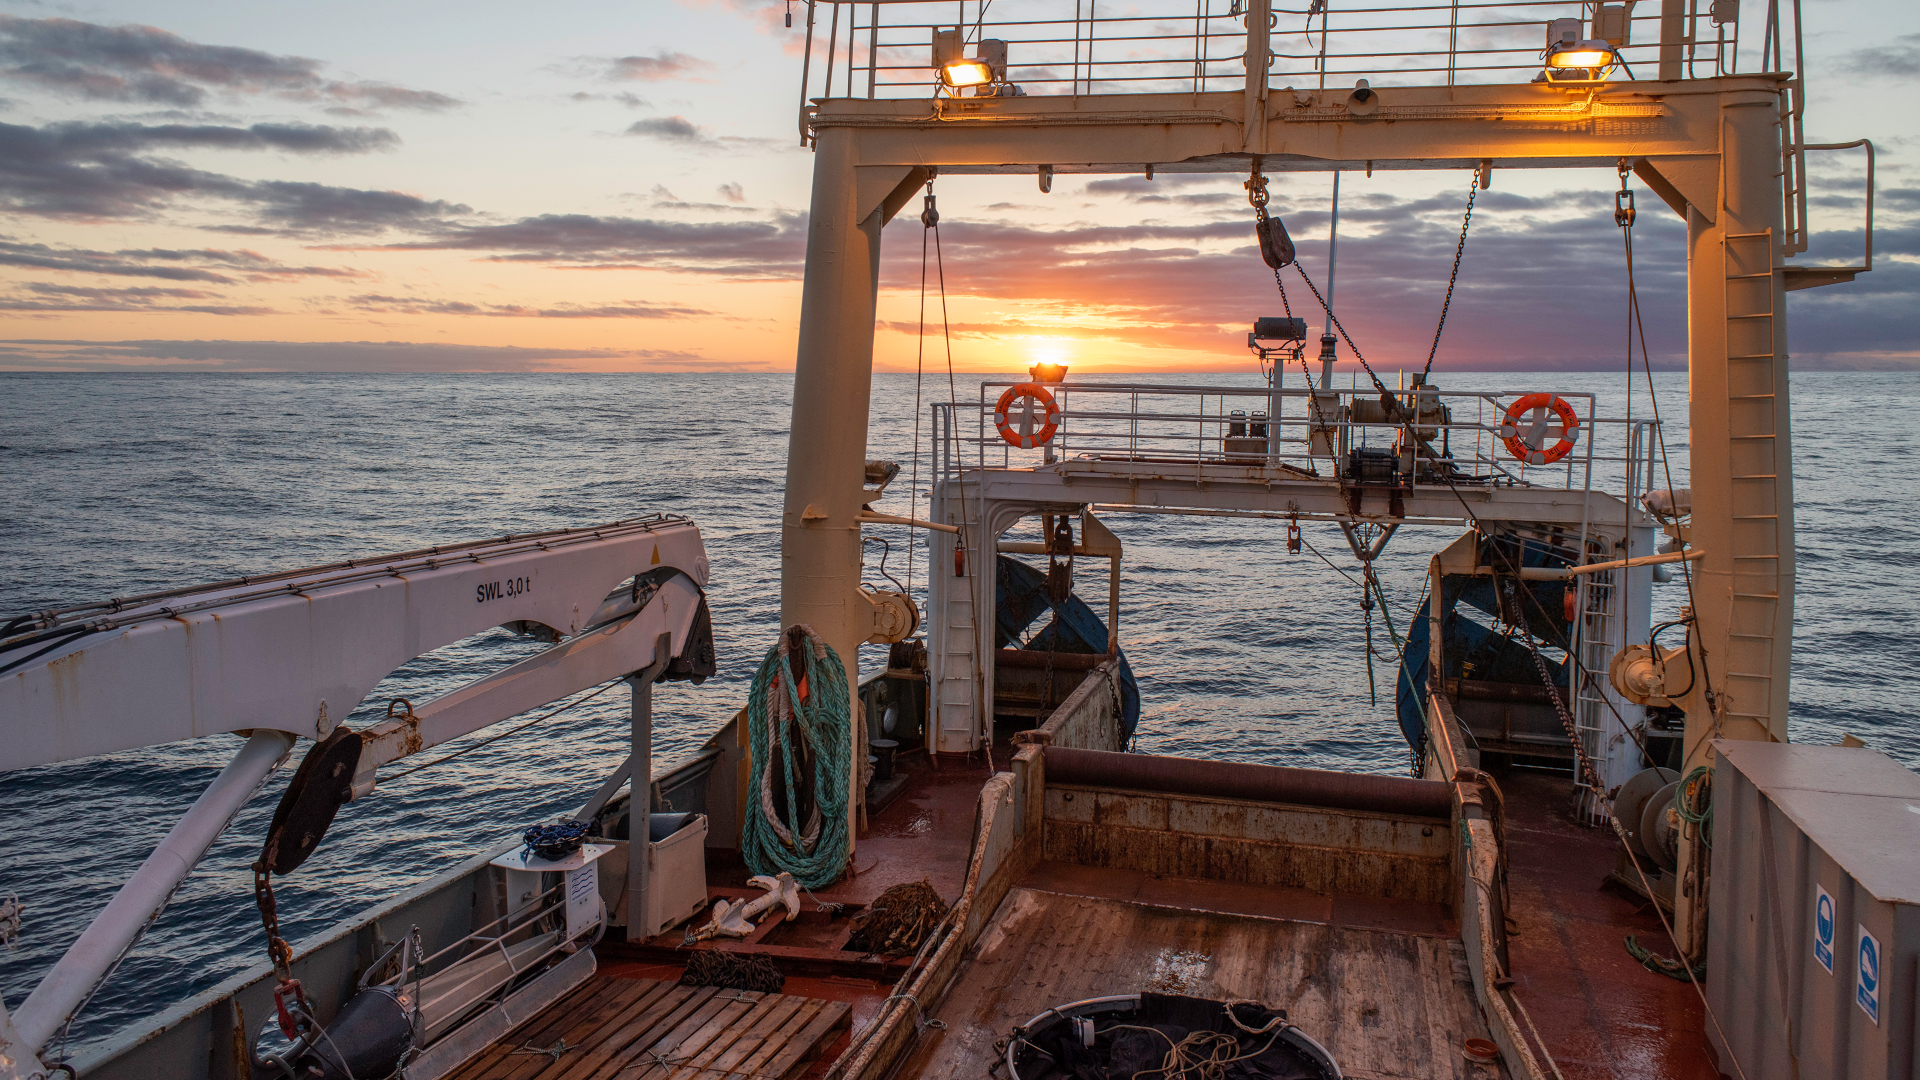 The sunset from a marine research ship during experimental fisheries in the Nordic region.